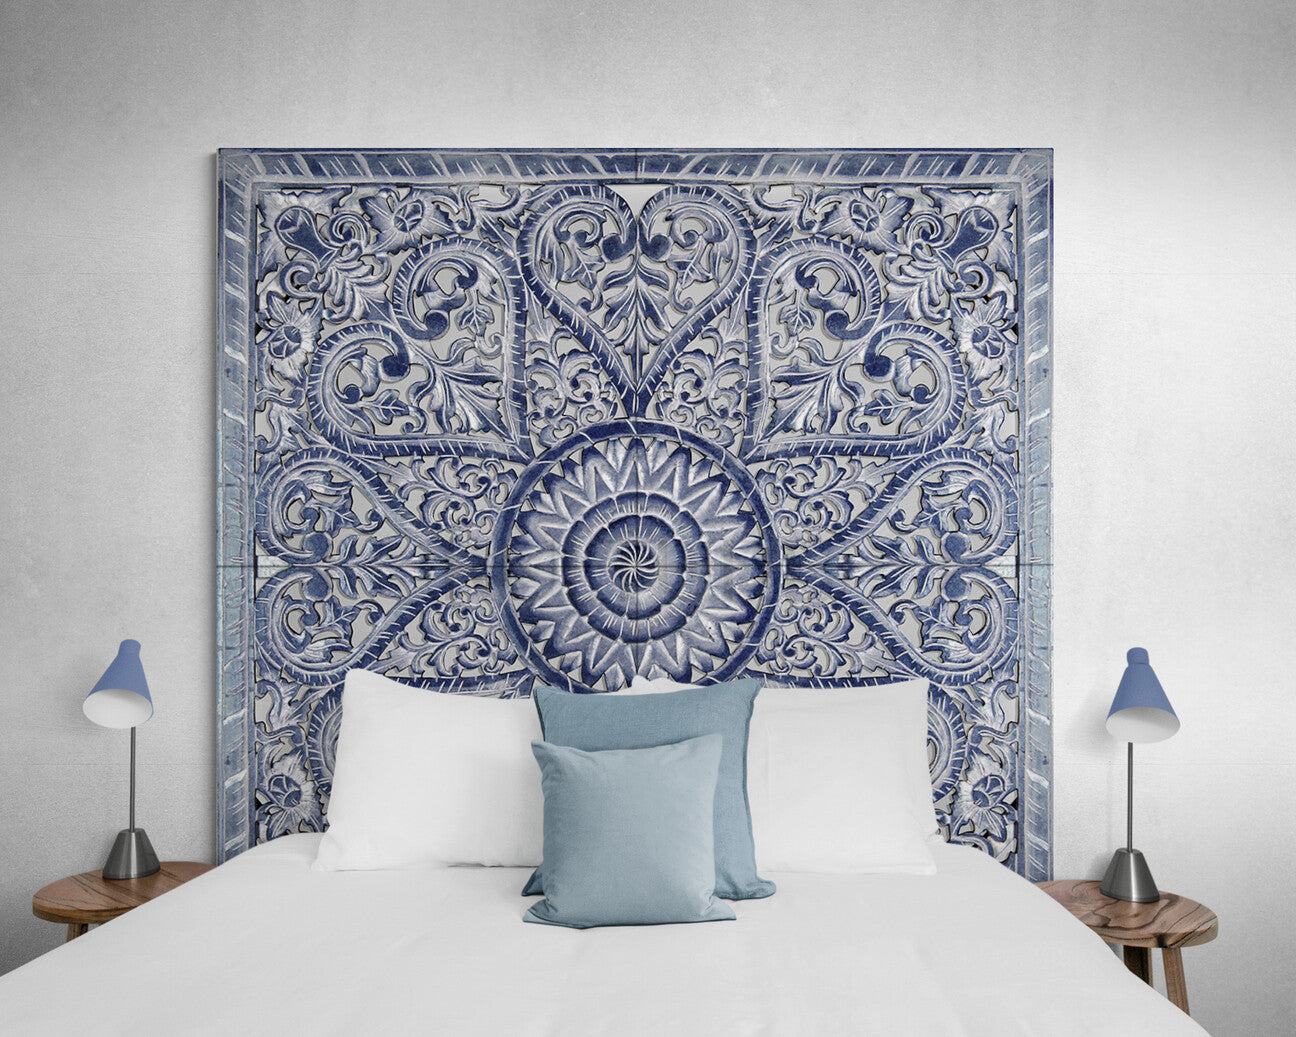 Carved Bed Headboard "Jantung" - Navy Blue Wash - Export